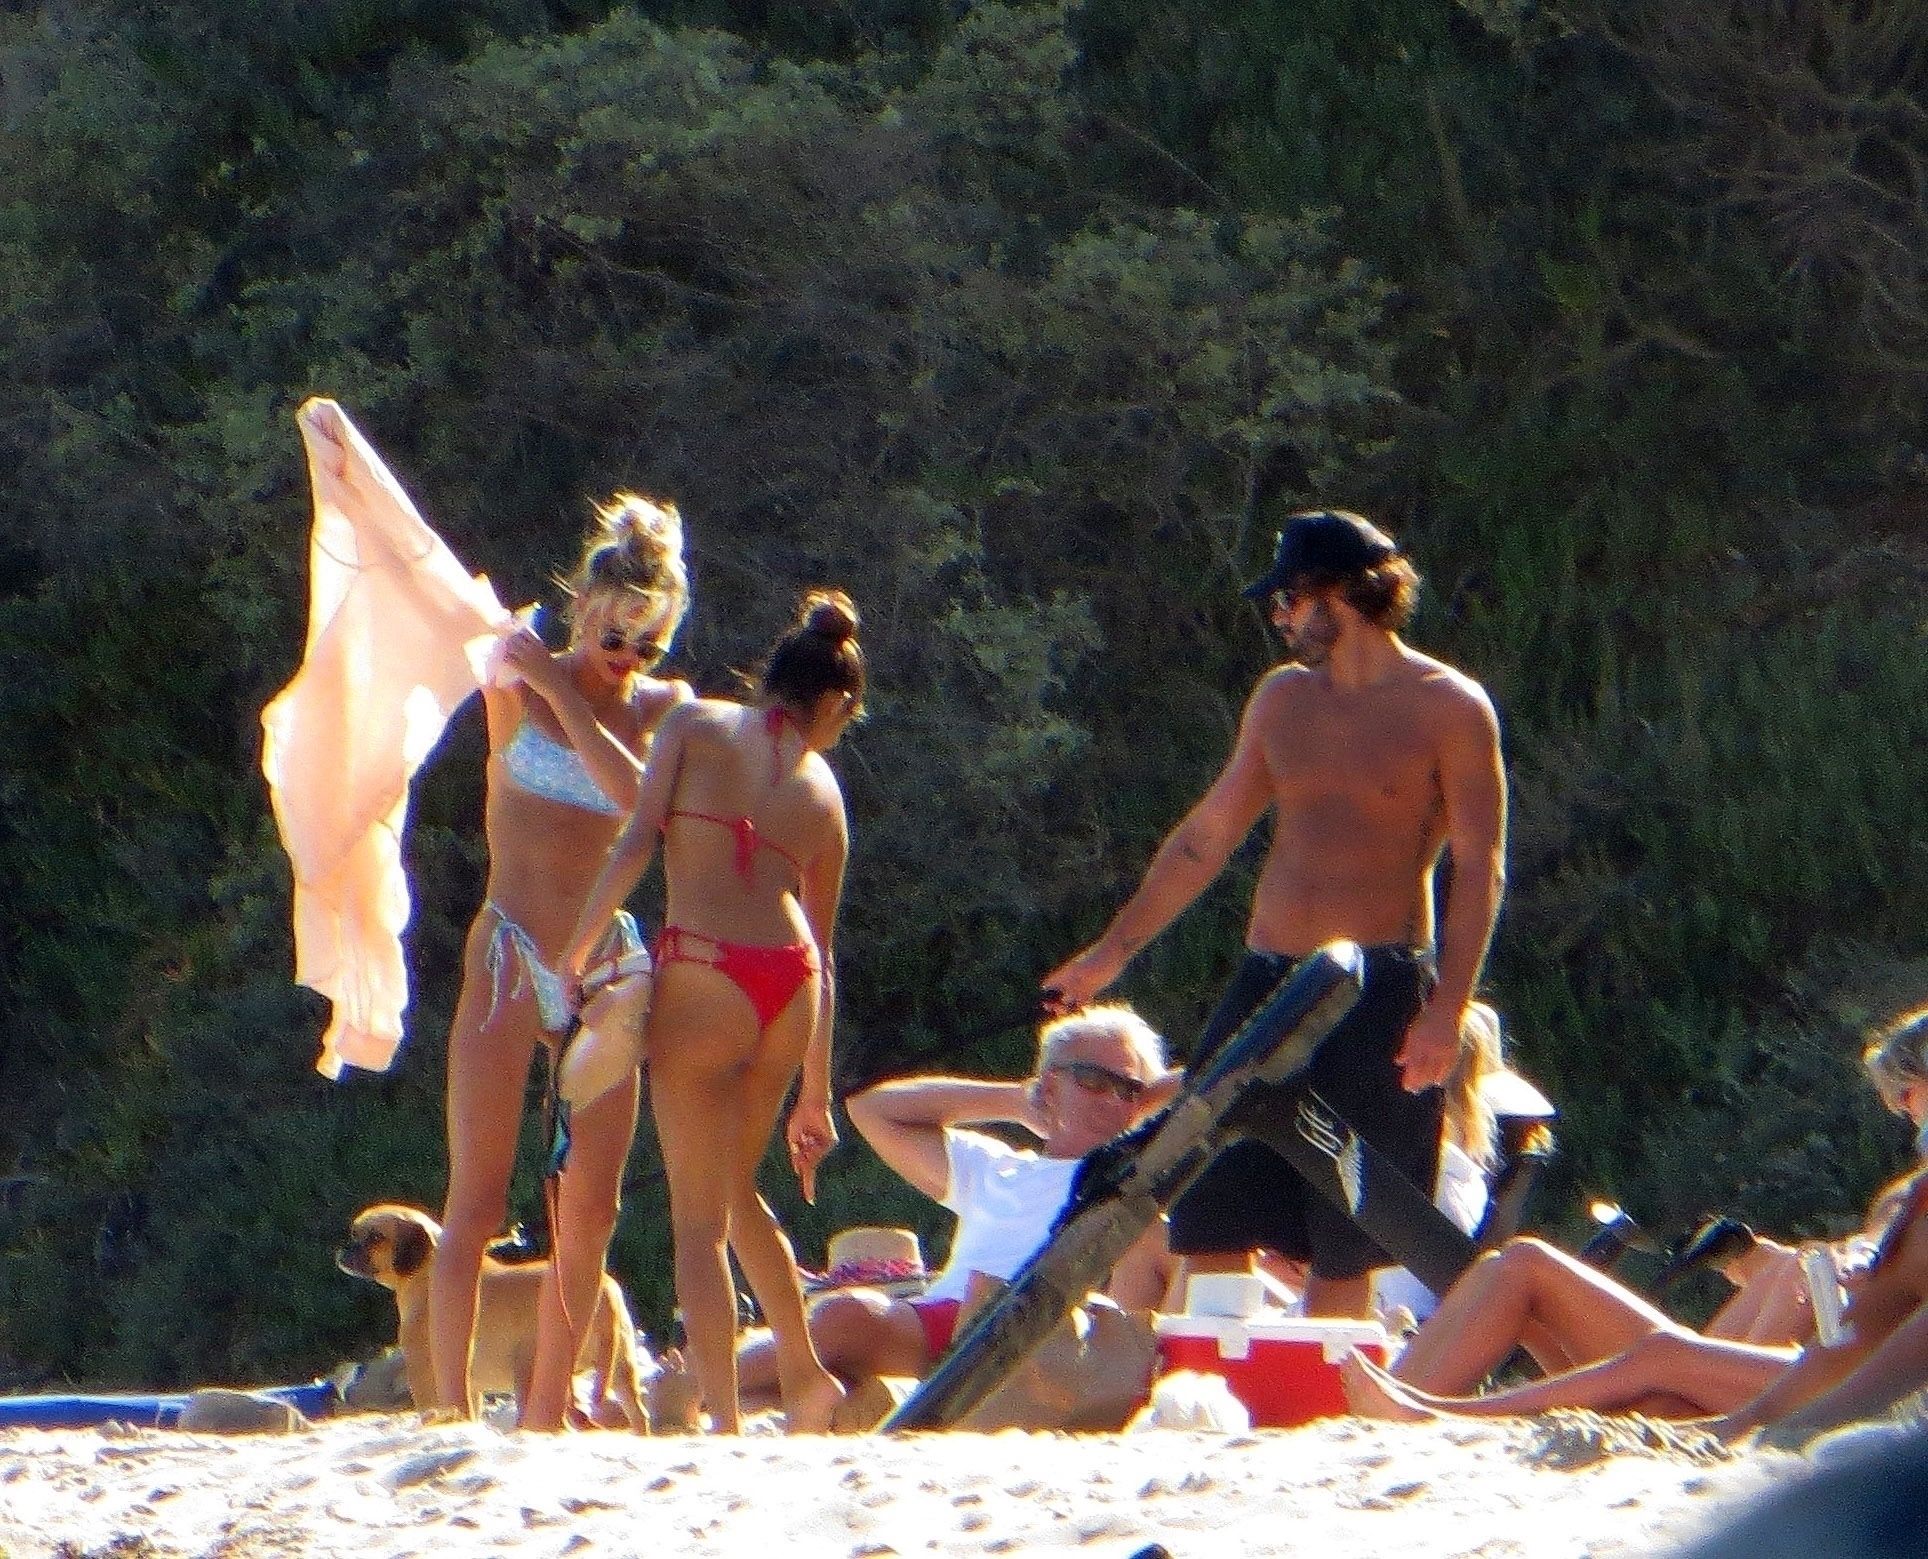 Brody Jenner & Briana Jungwirth Enjoy a Beach Day with Family and Friends (61 Photos)